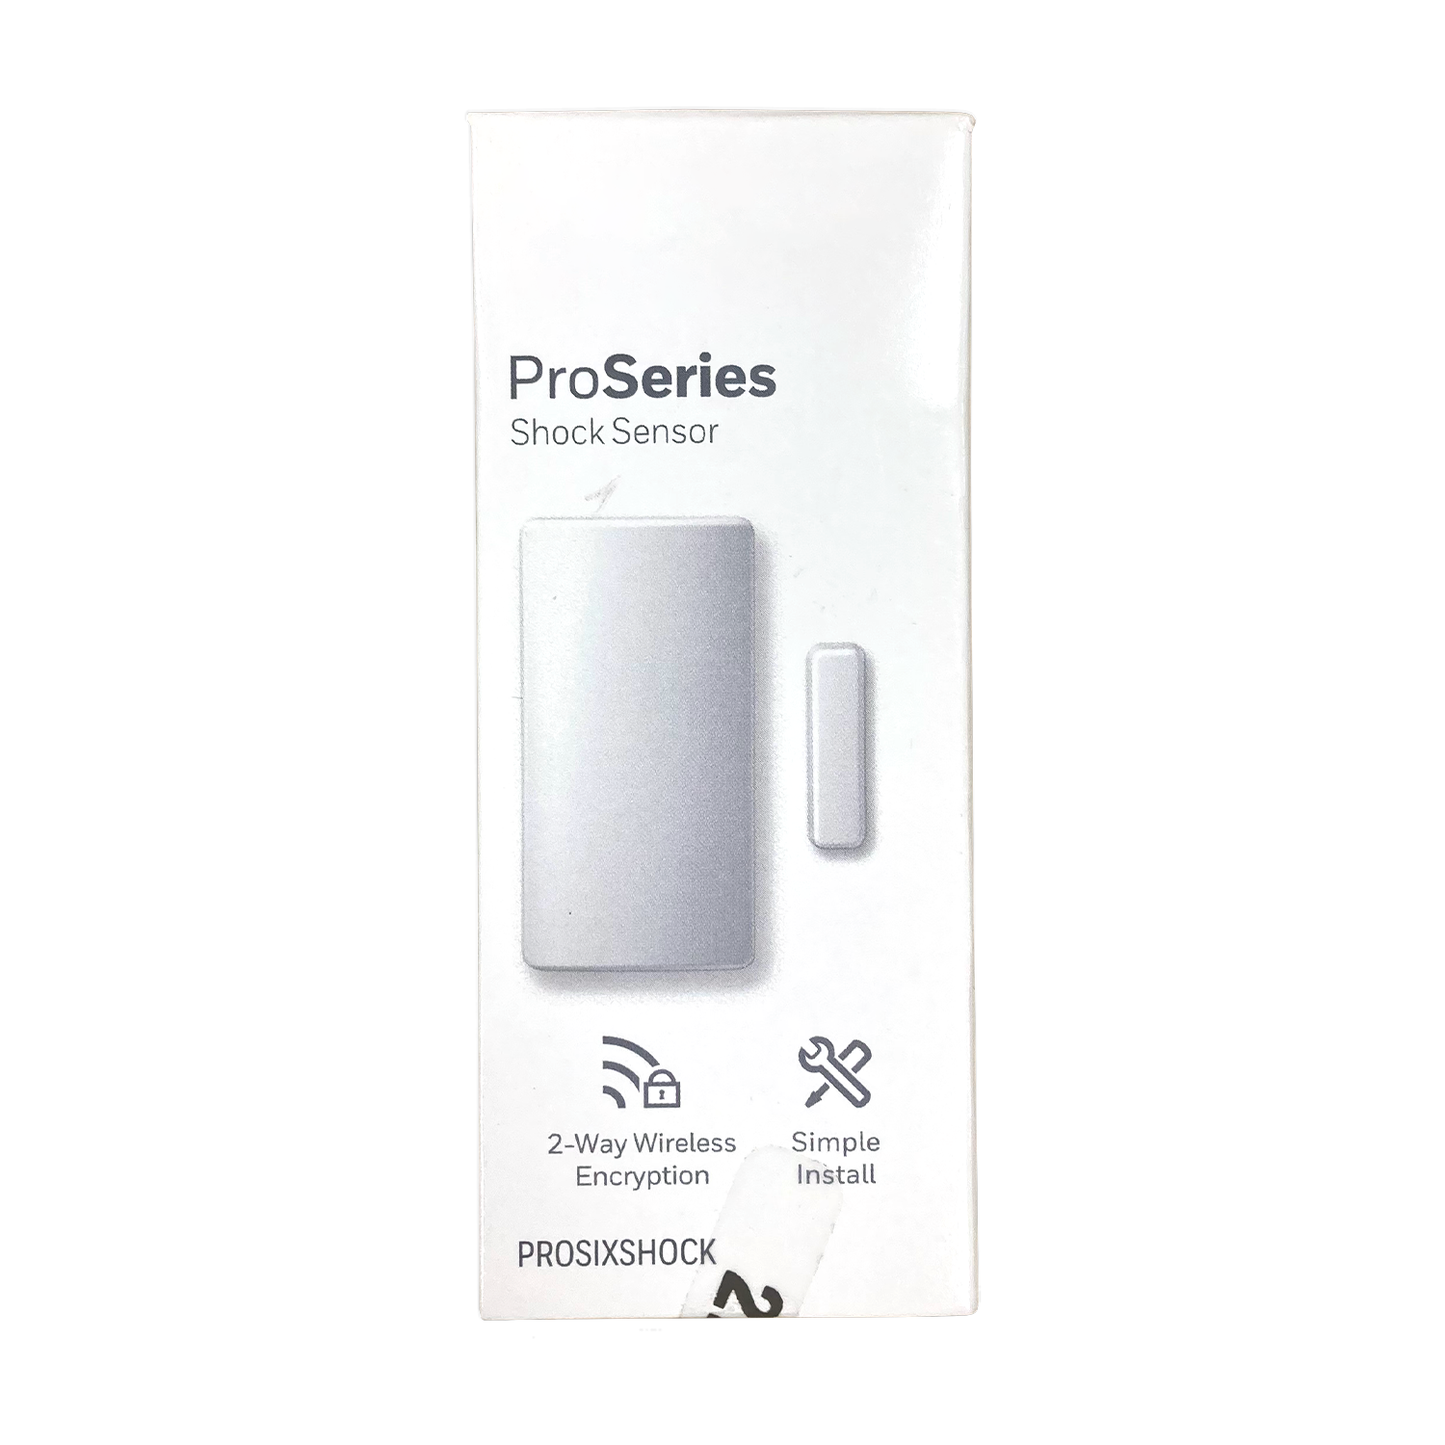 The ProSeries Shock Sensor Shock Sensor is designed to mount directly on the glass surface and offers excellent protection for all glass types—including plate, tempered, laminated and wired. The versatile detector provides outstanding false alarm immunity.  Suggested for TRTs